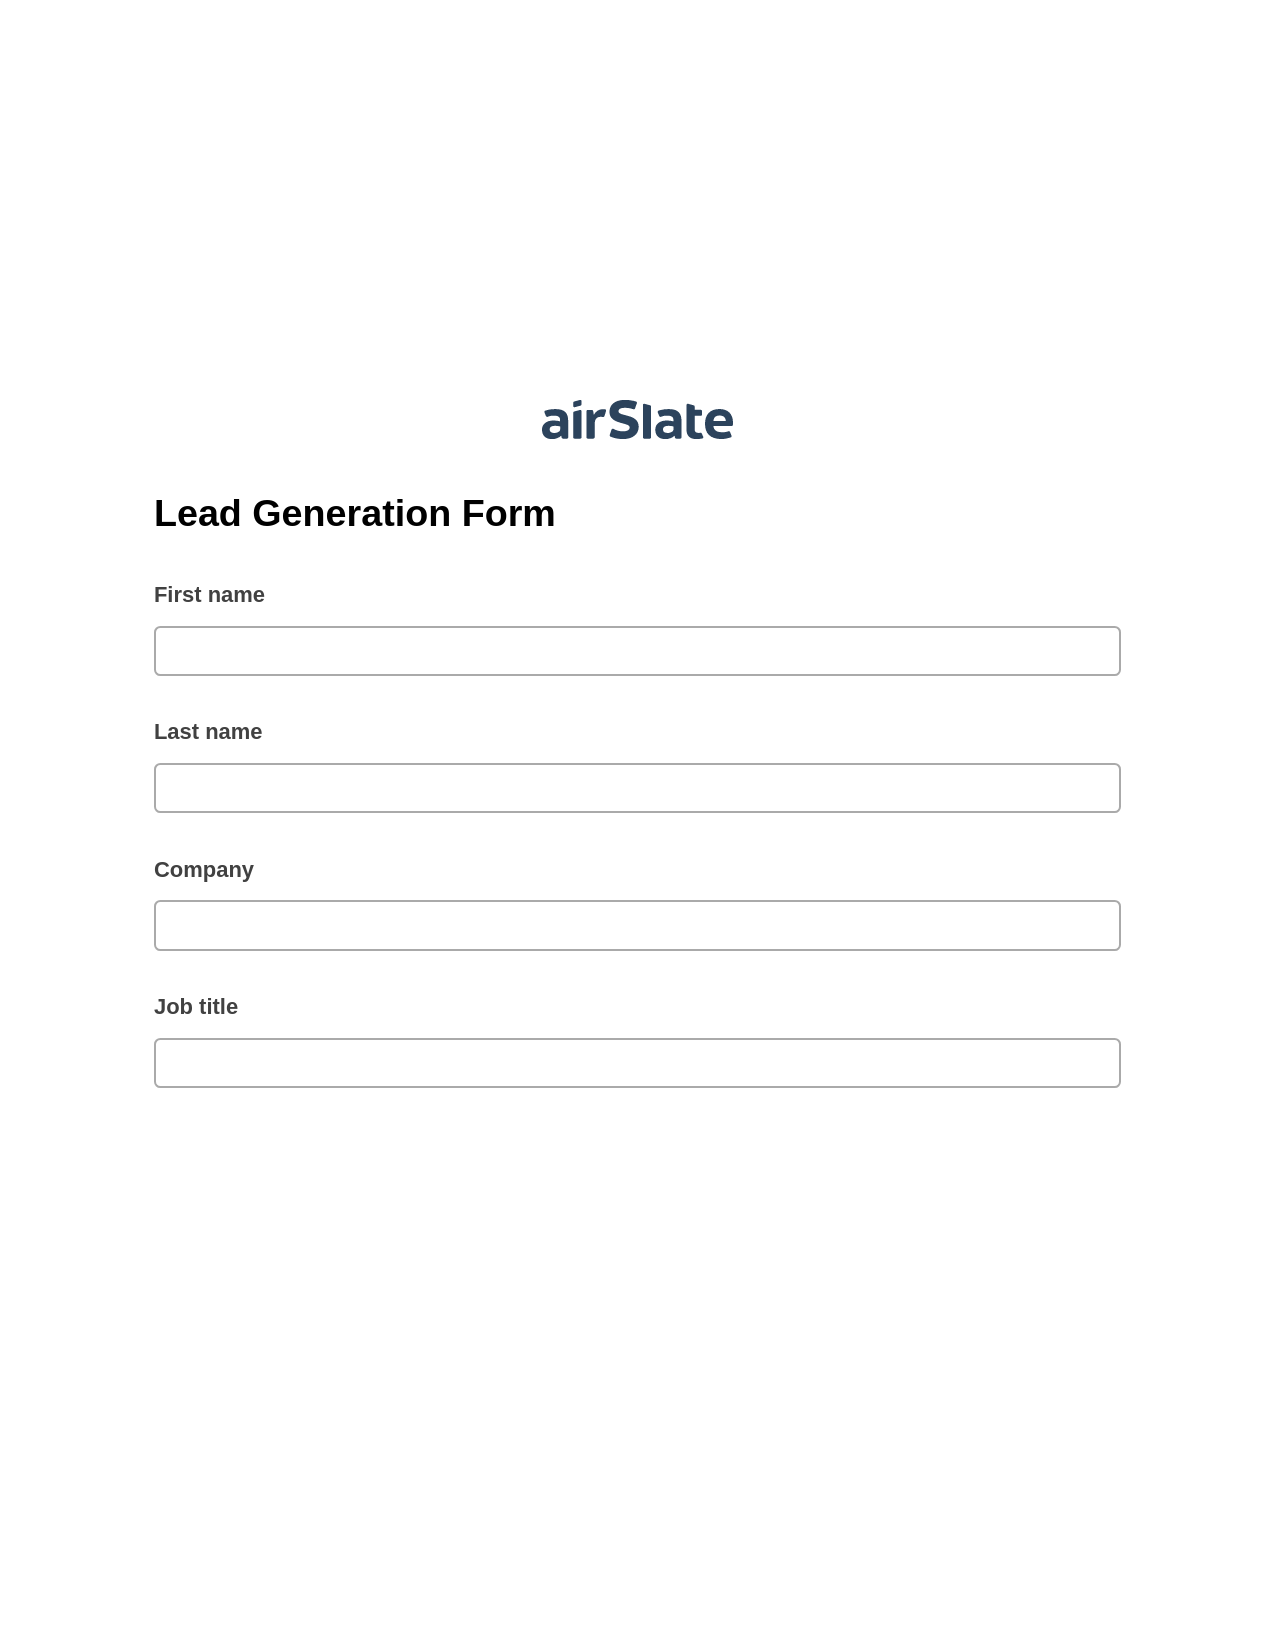 Lead Generation Form Pre-fill from CSV File Bot, Rename Slate Bot, Archive to SharePoint Folder Bot